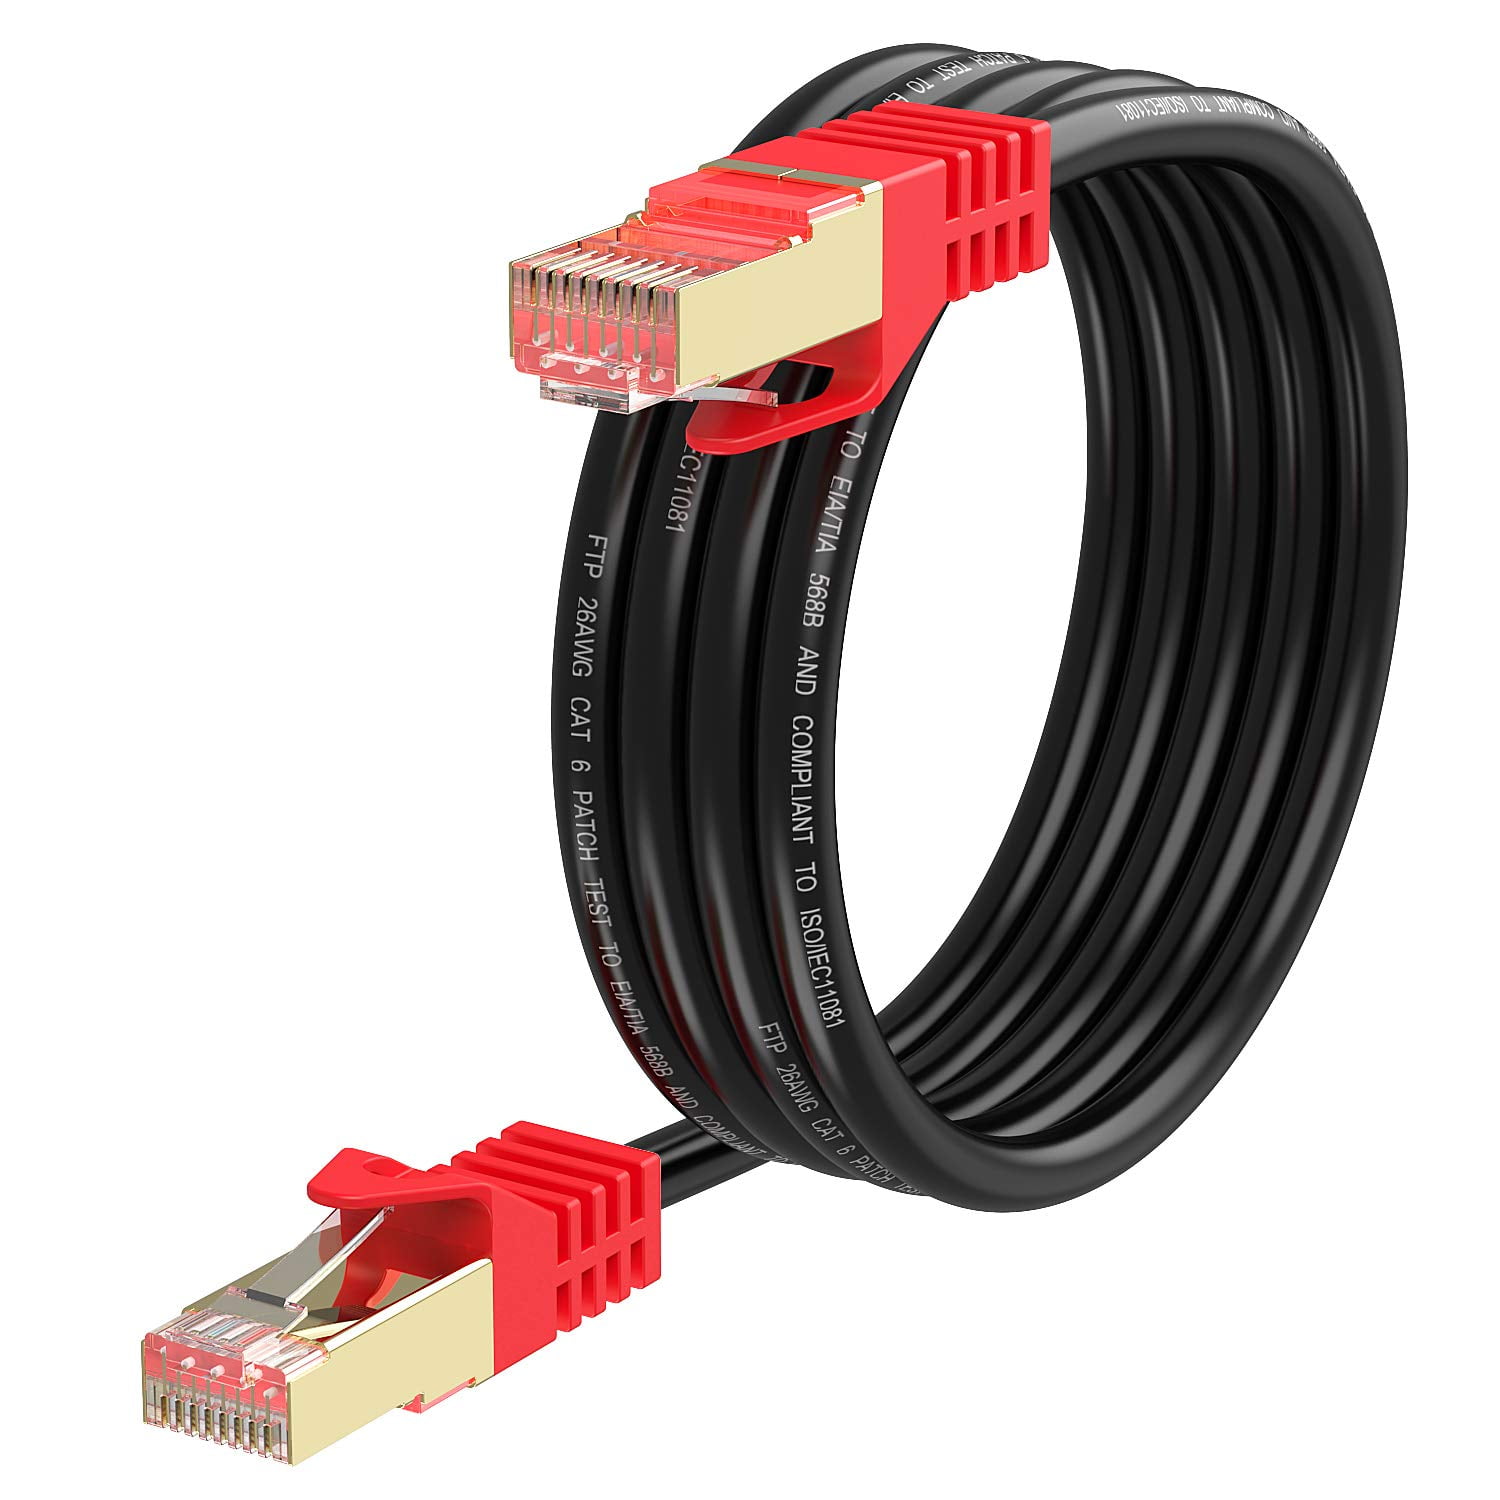 Ethernet Cable 30ft, GLANICS Cat 8 Network Internet Cable, LAN Cord with  RJ45 Connector for Modems, Routers, Switches, Gaming, Network Adapters,  PS5, PS4, PC, Laptop, Desktop 